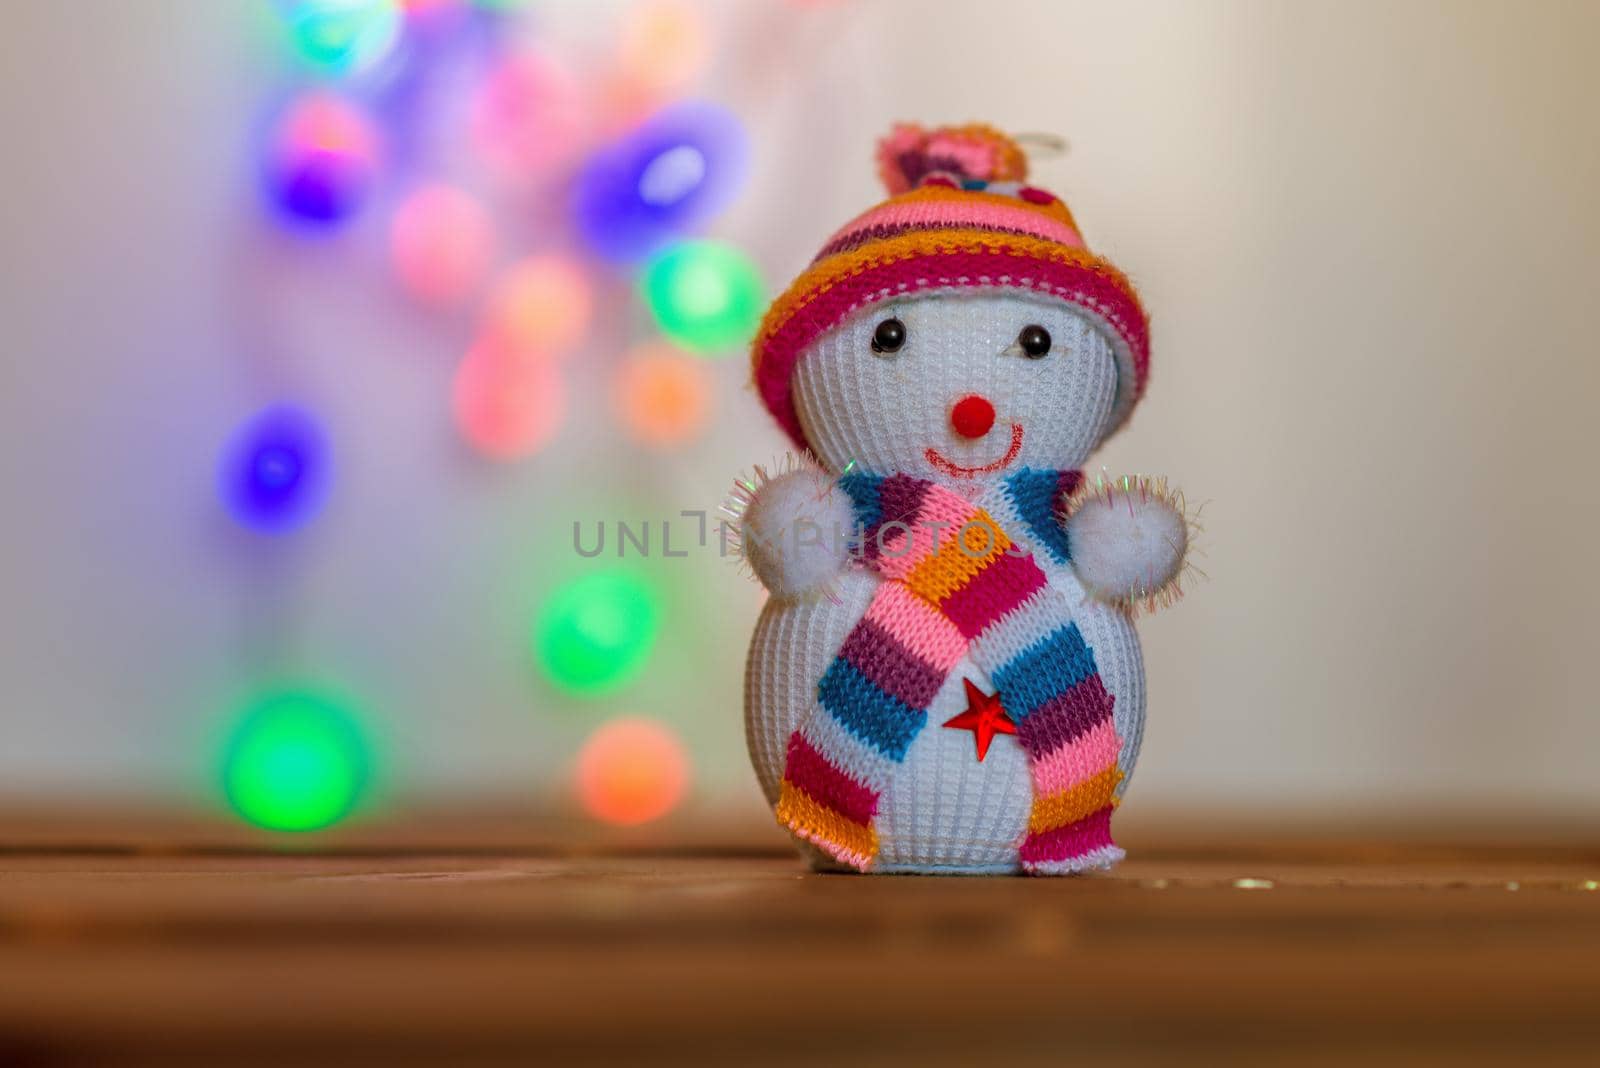 Snowman figurine.Blurry Christmas lights out of focus in the background. Bokeh